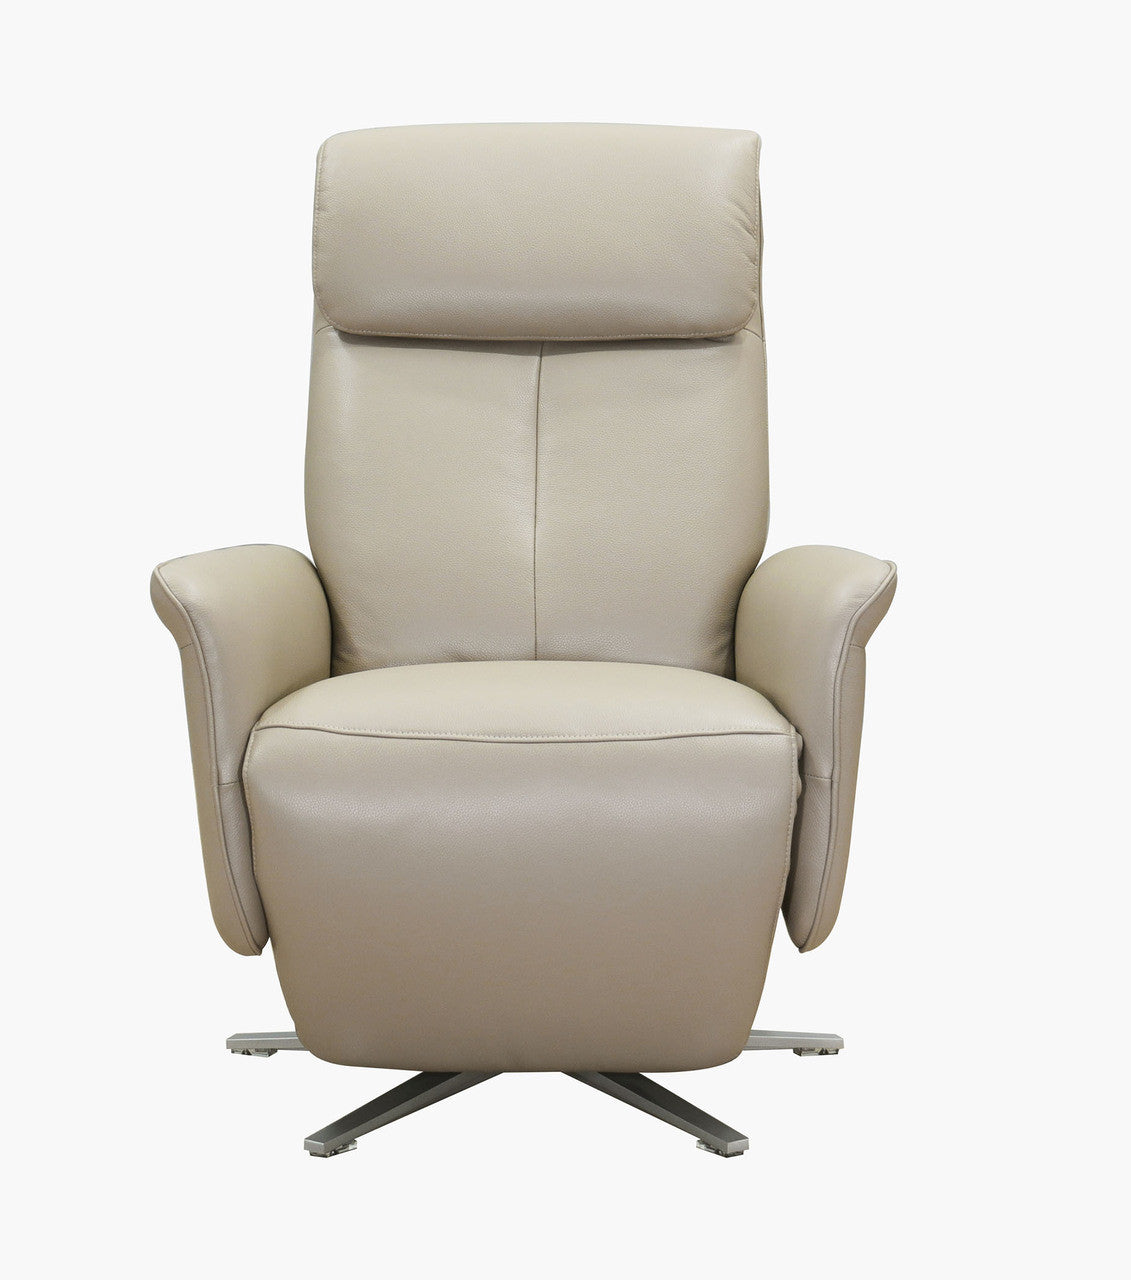 Tulip Taupe Leather Power Reclining 360 Swivel Chair - MJM Furniture